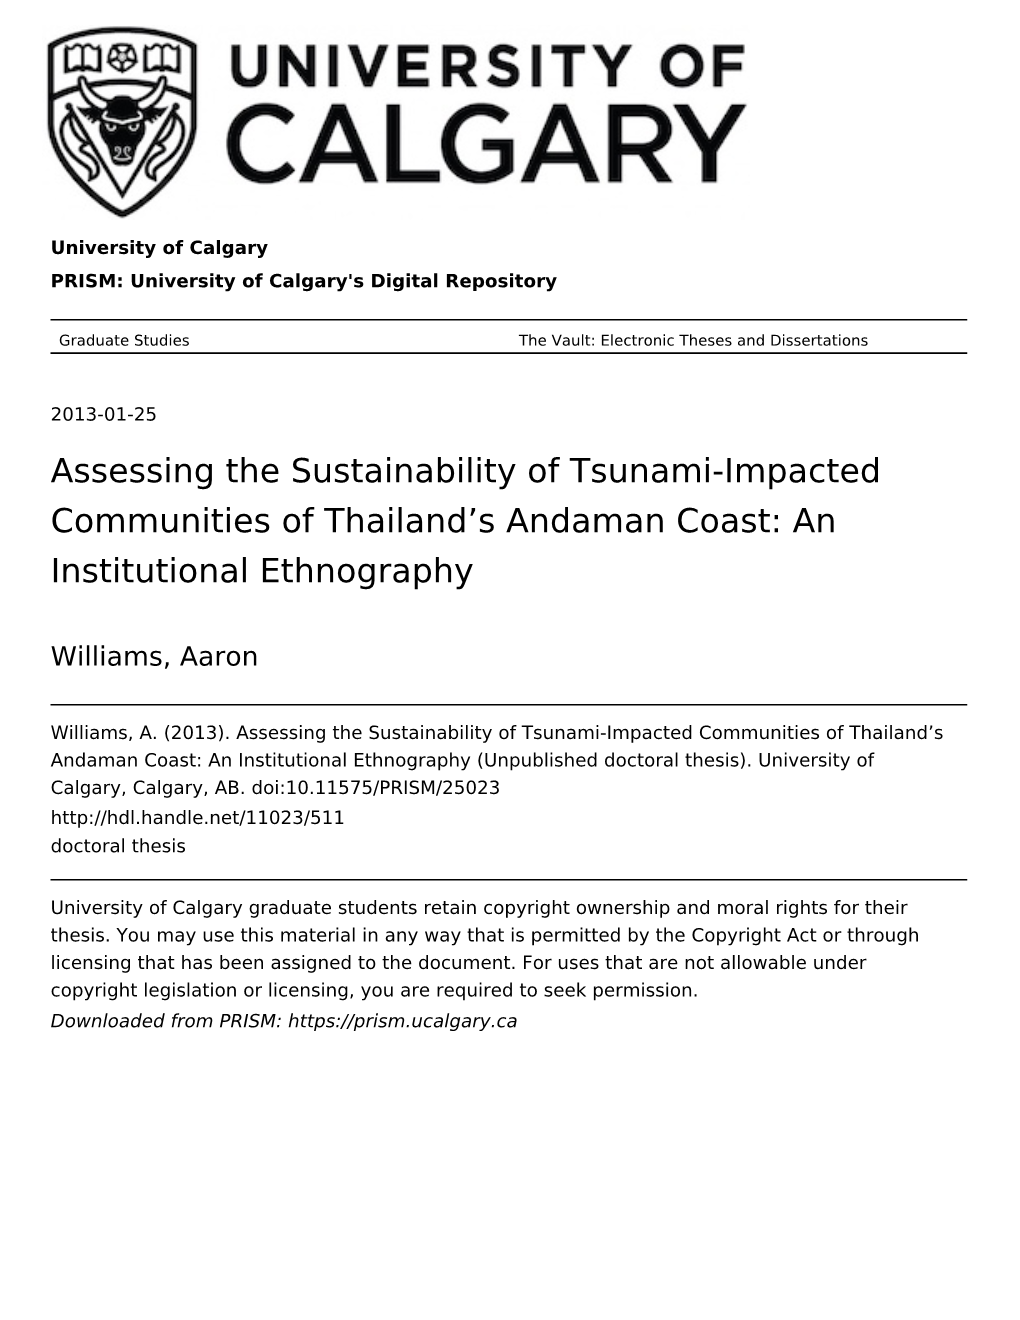 Assessing the Sustainability of Tsunami-Impacted Communities of Thailand’S Andaman Coast: an Institutional Ethnography